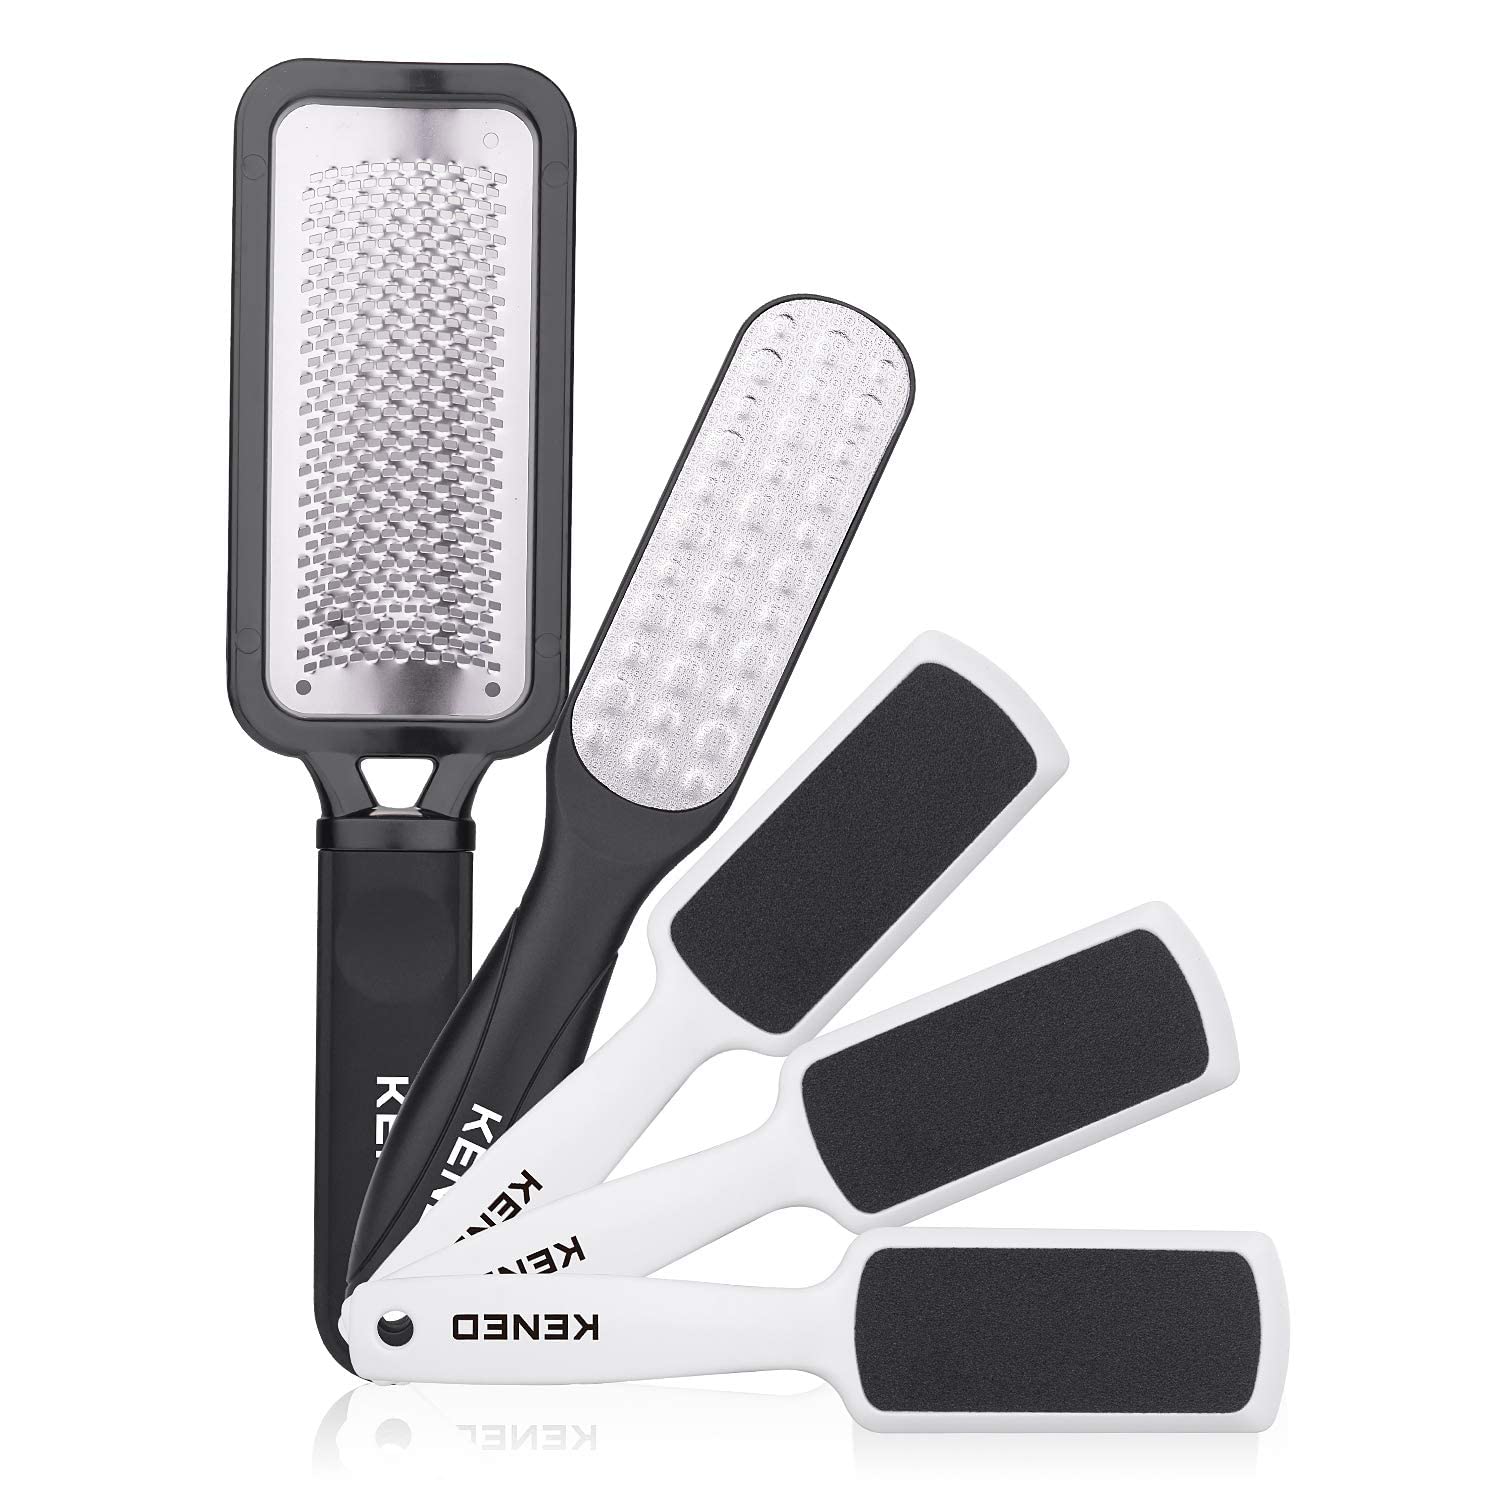 Black Handle 'Cheese Grater' Type Foot File - 1 pack